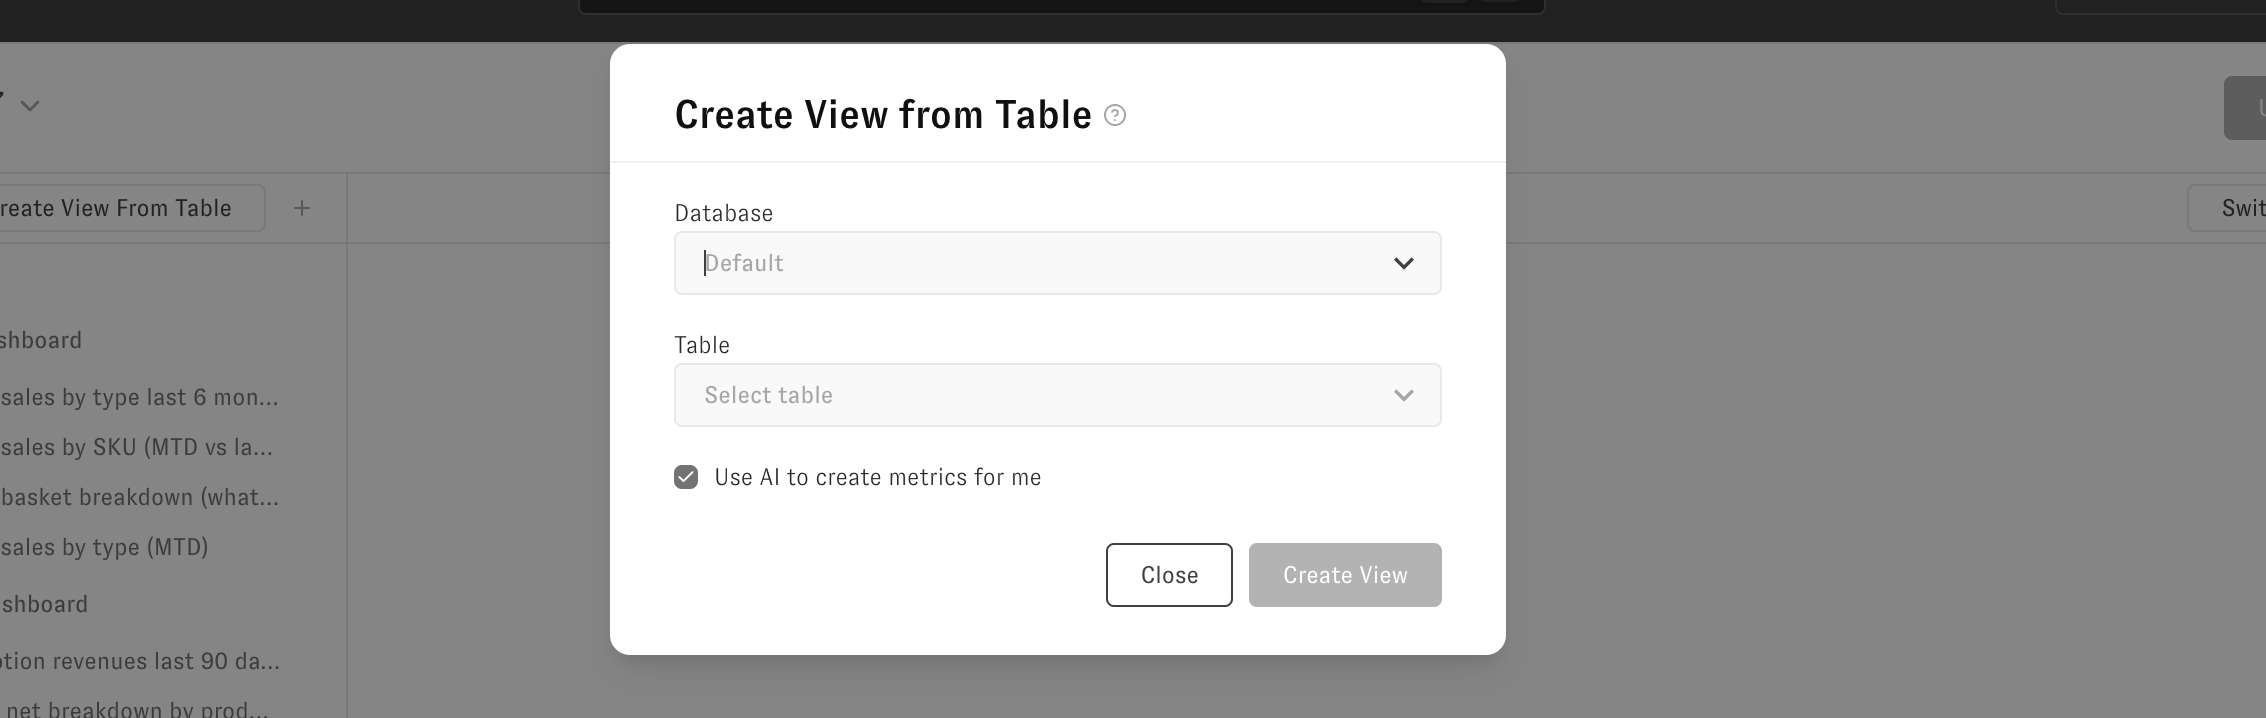 create-view-from-table